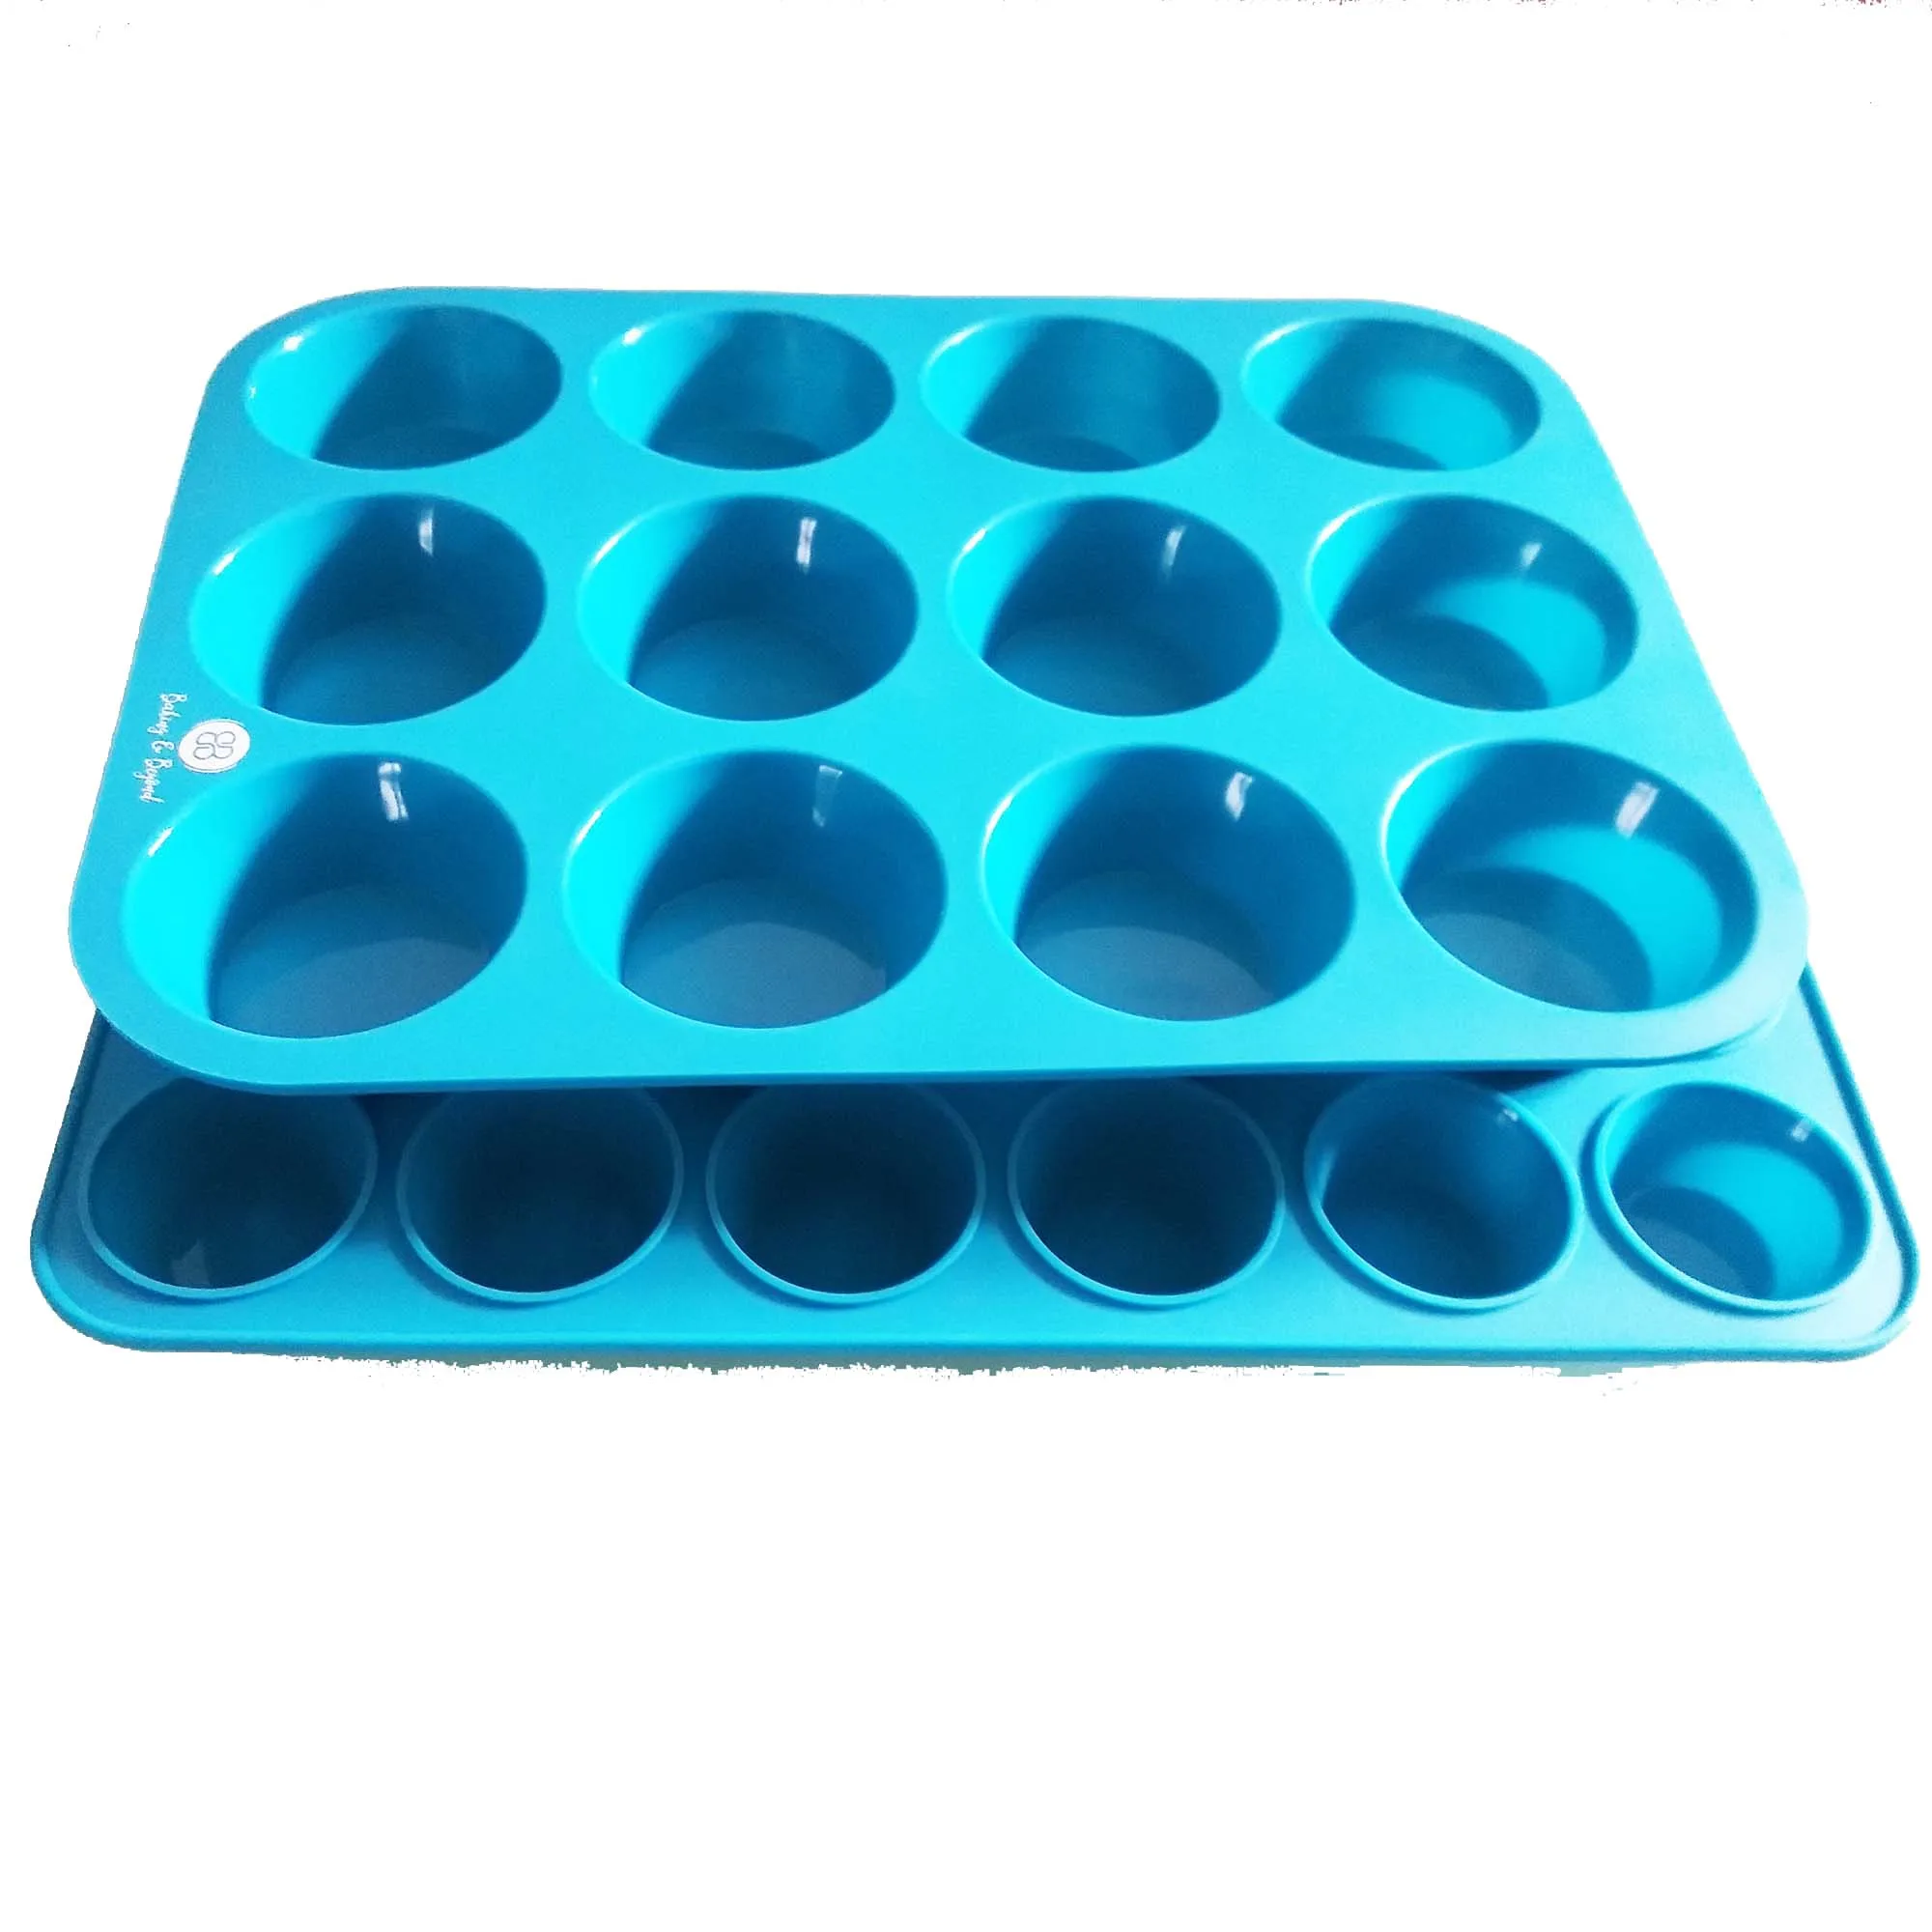 Silicone Nonstick 12 Cups Muffin Pan Cupcake Tray Cake Baking Mold New 